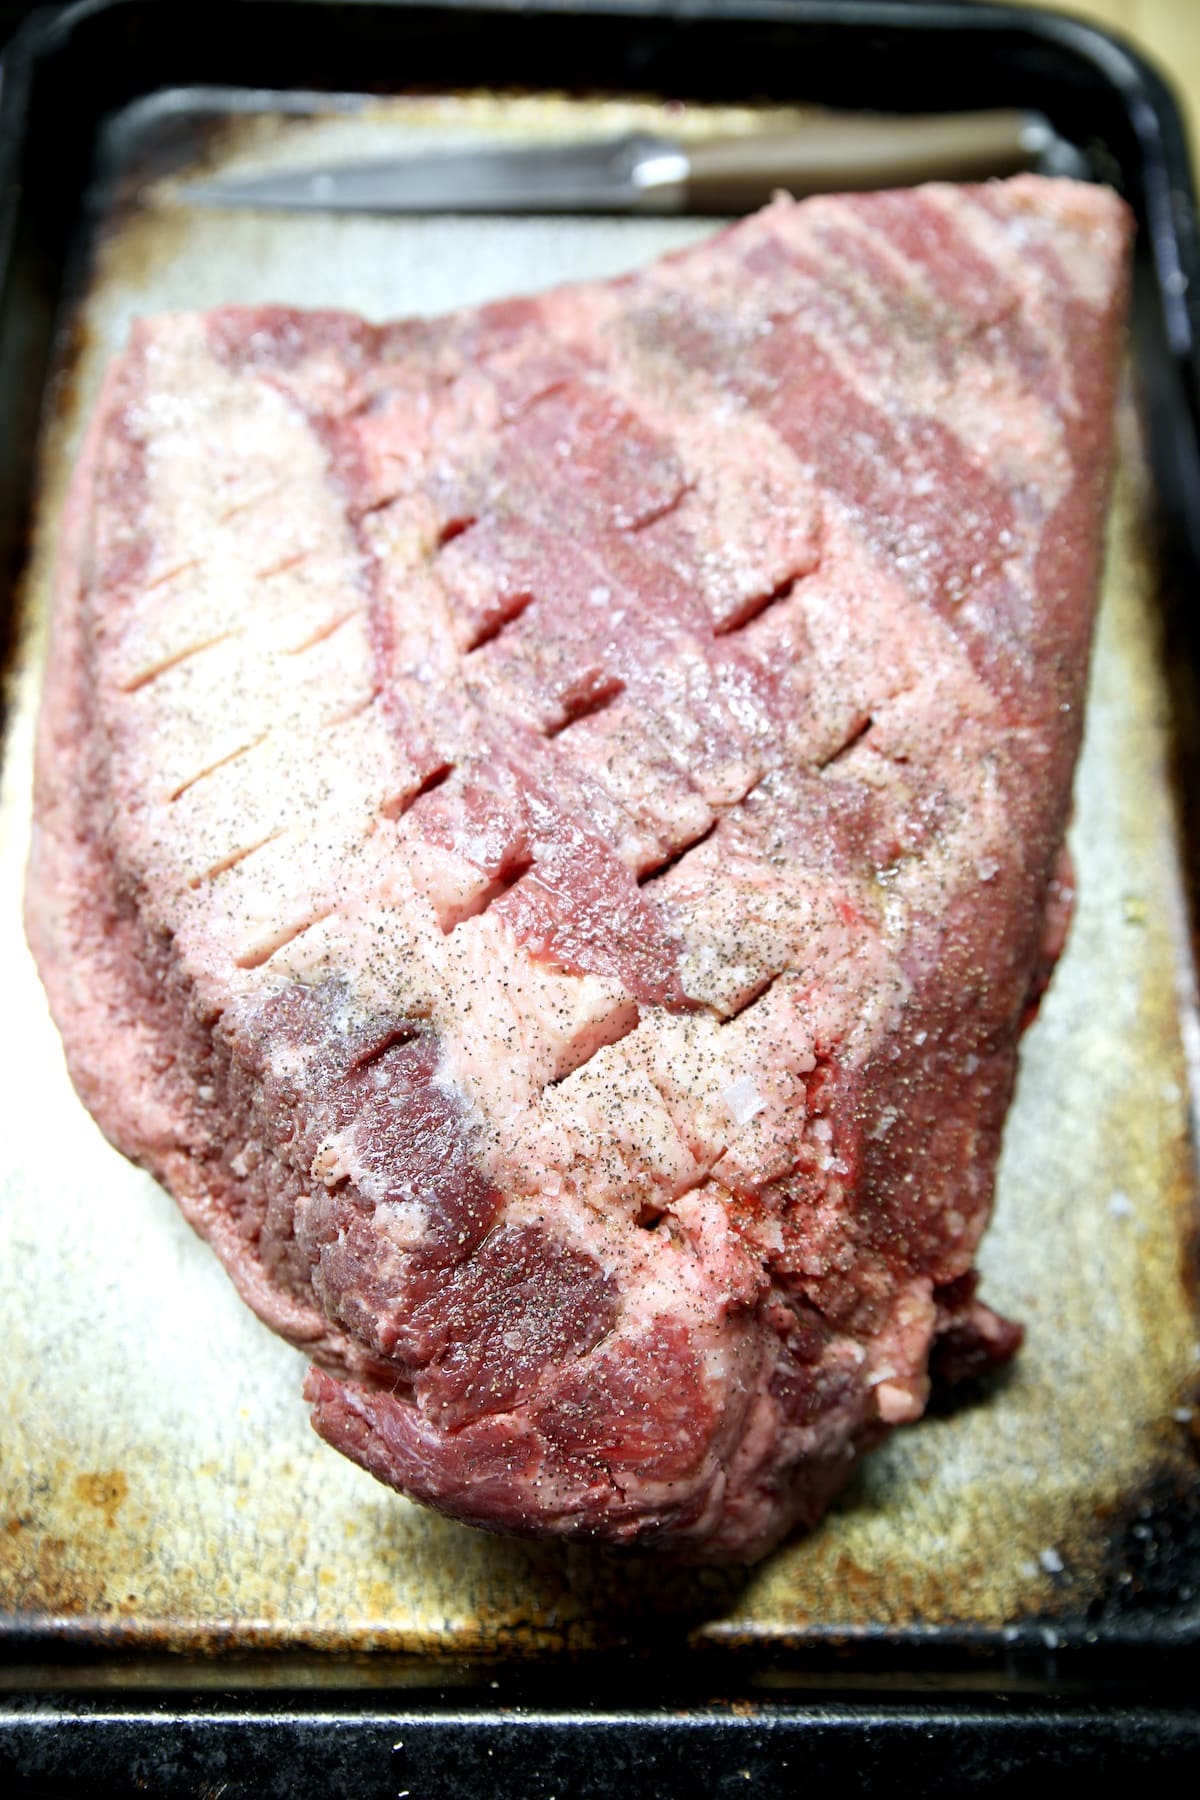 Raw brisket point on a sheet pan, pierced with knife.